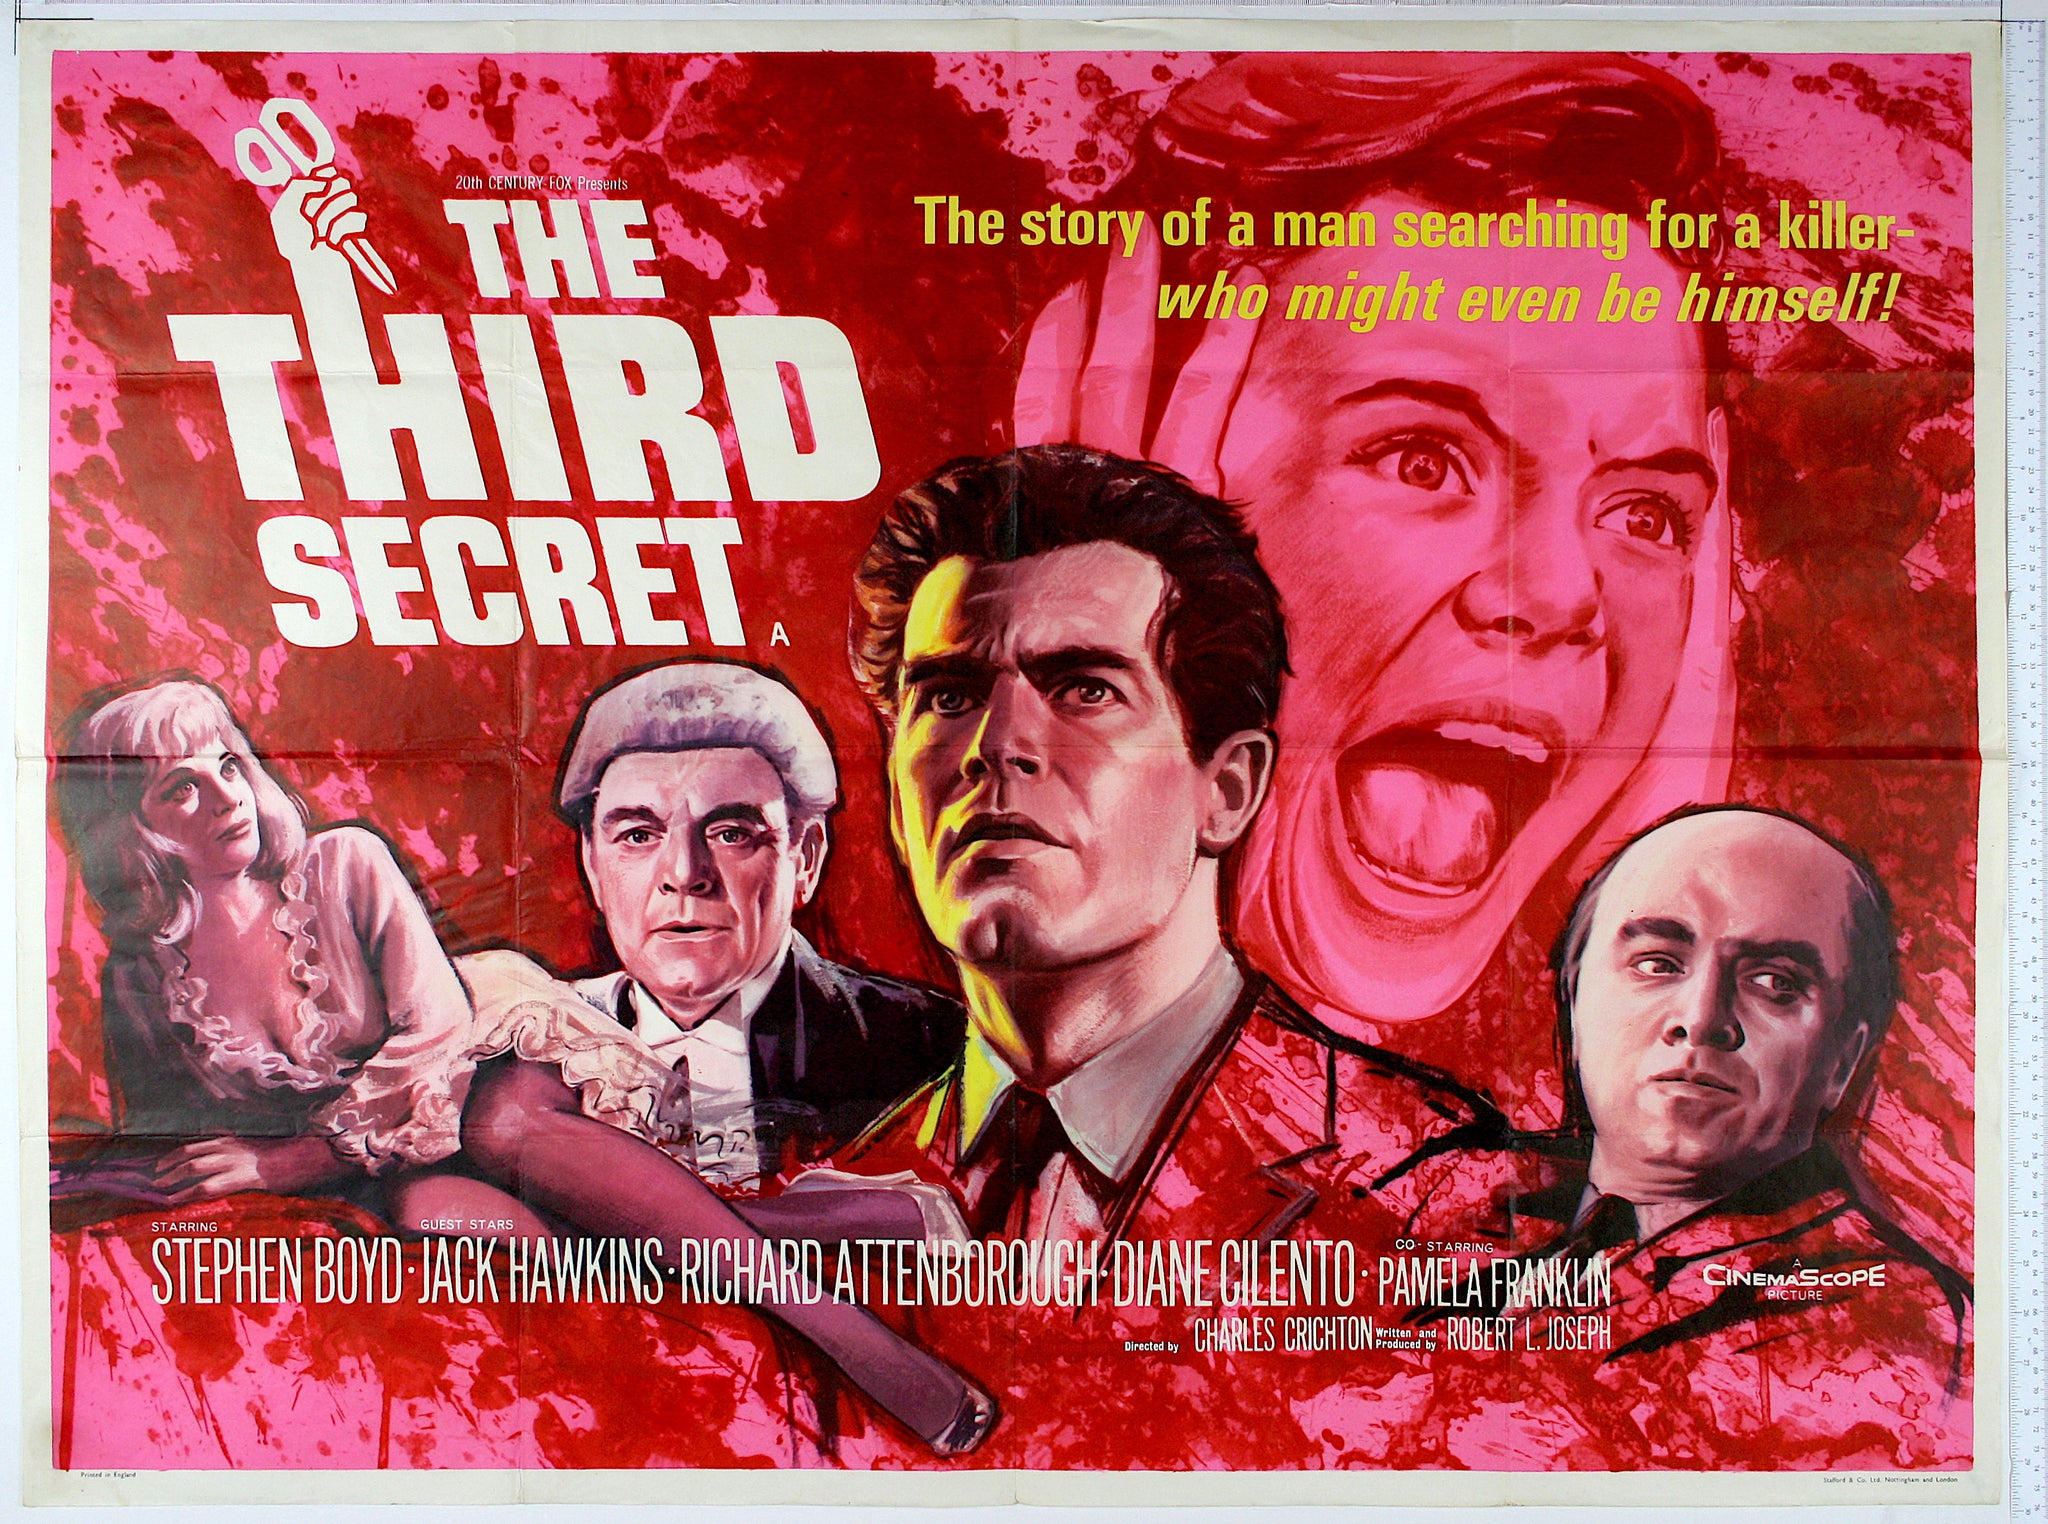 On mottled red, artwork of screaming girl, with portraits of each main character, Boyd at centre. H of title has dagger motif.